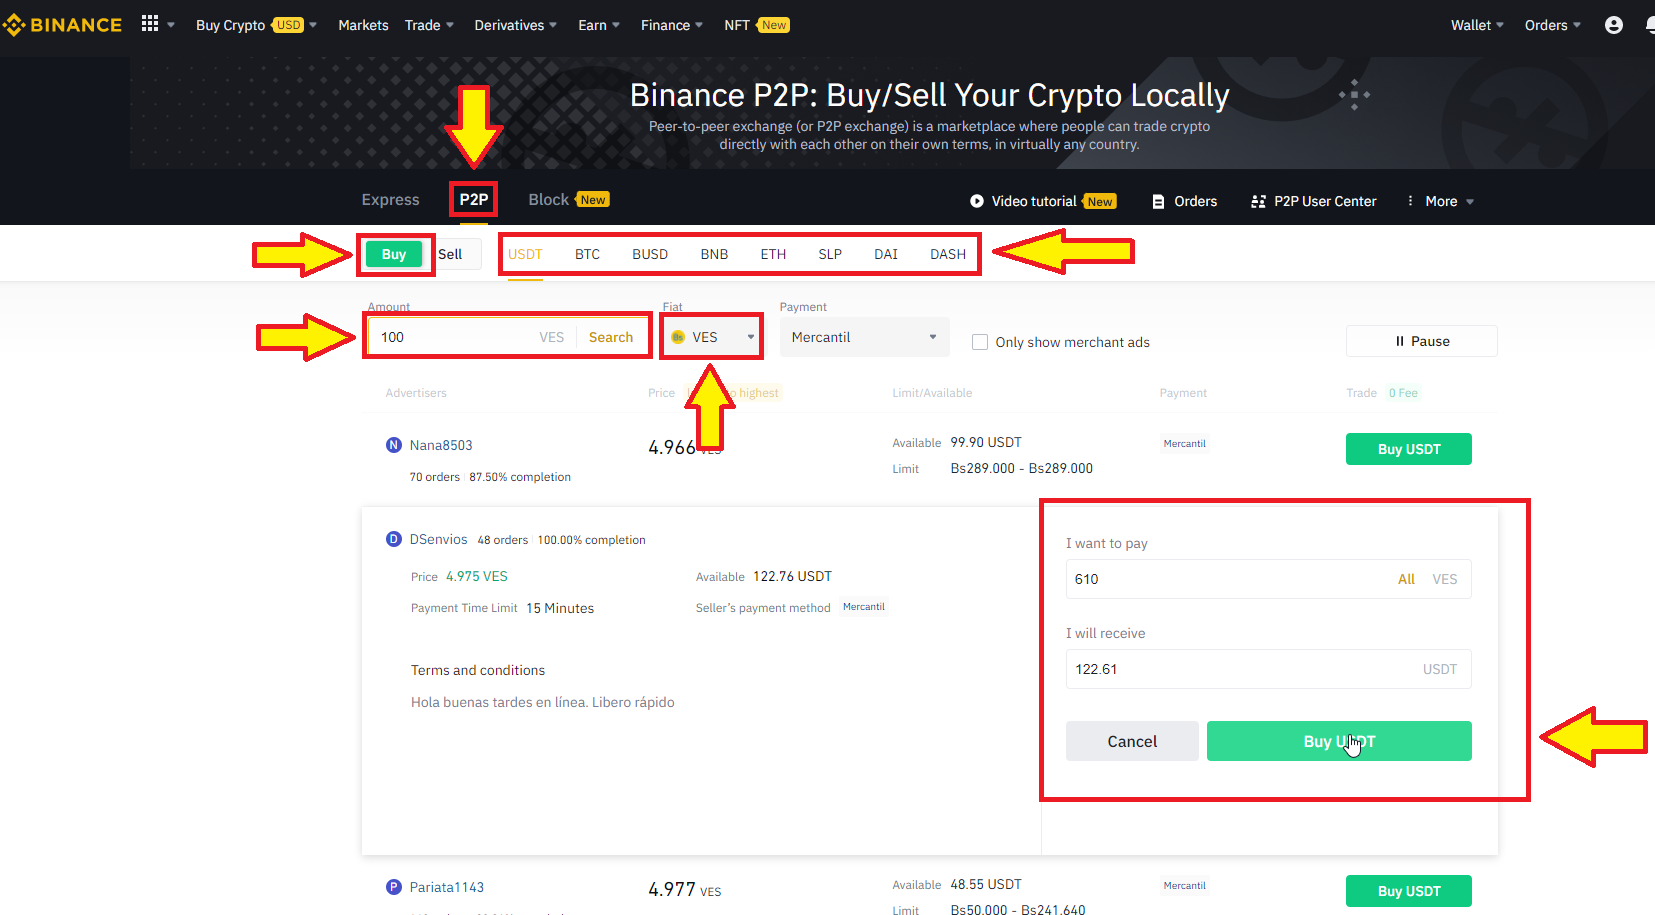 Buy Elemon crypto in P2P with a verified account on Binance